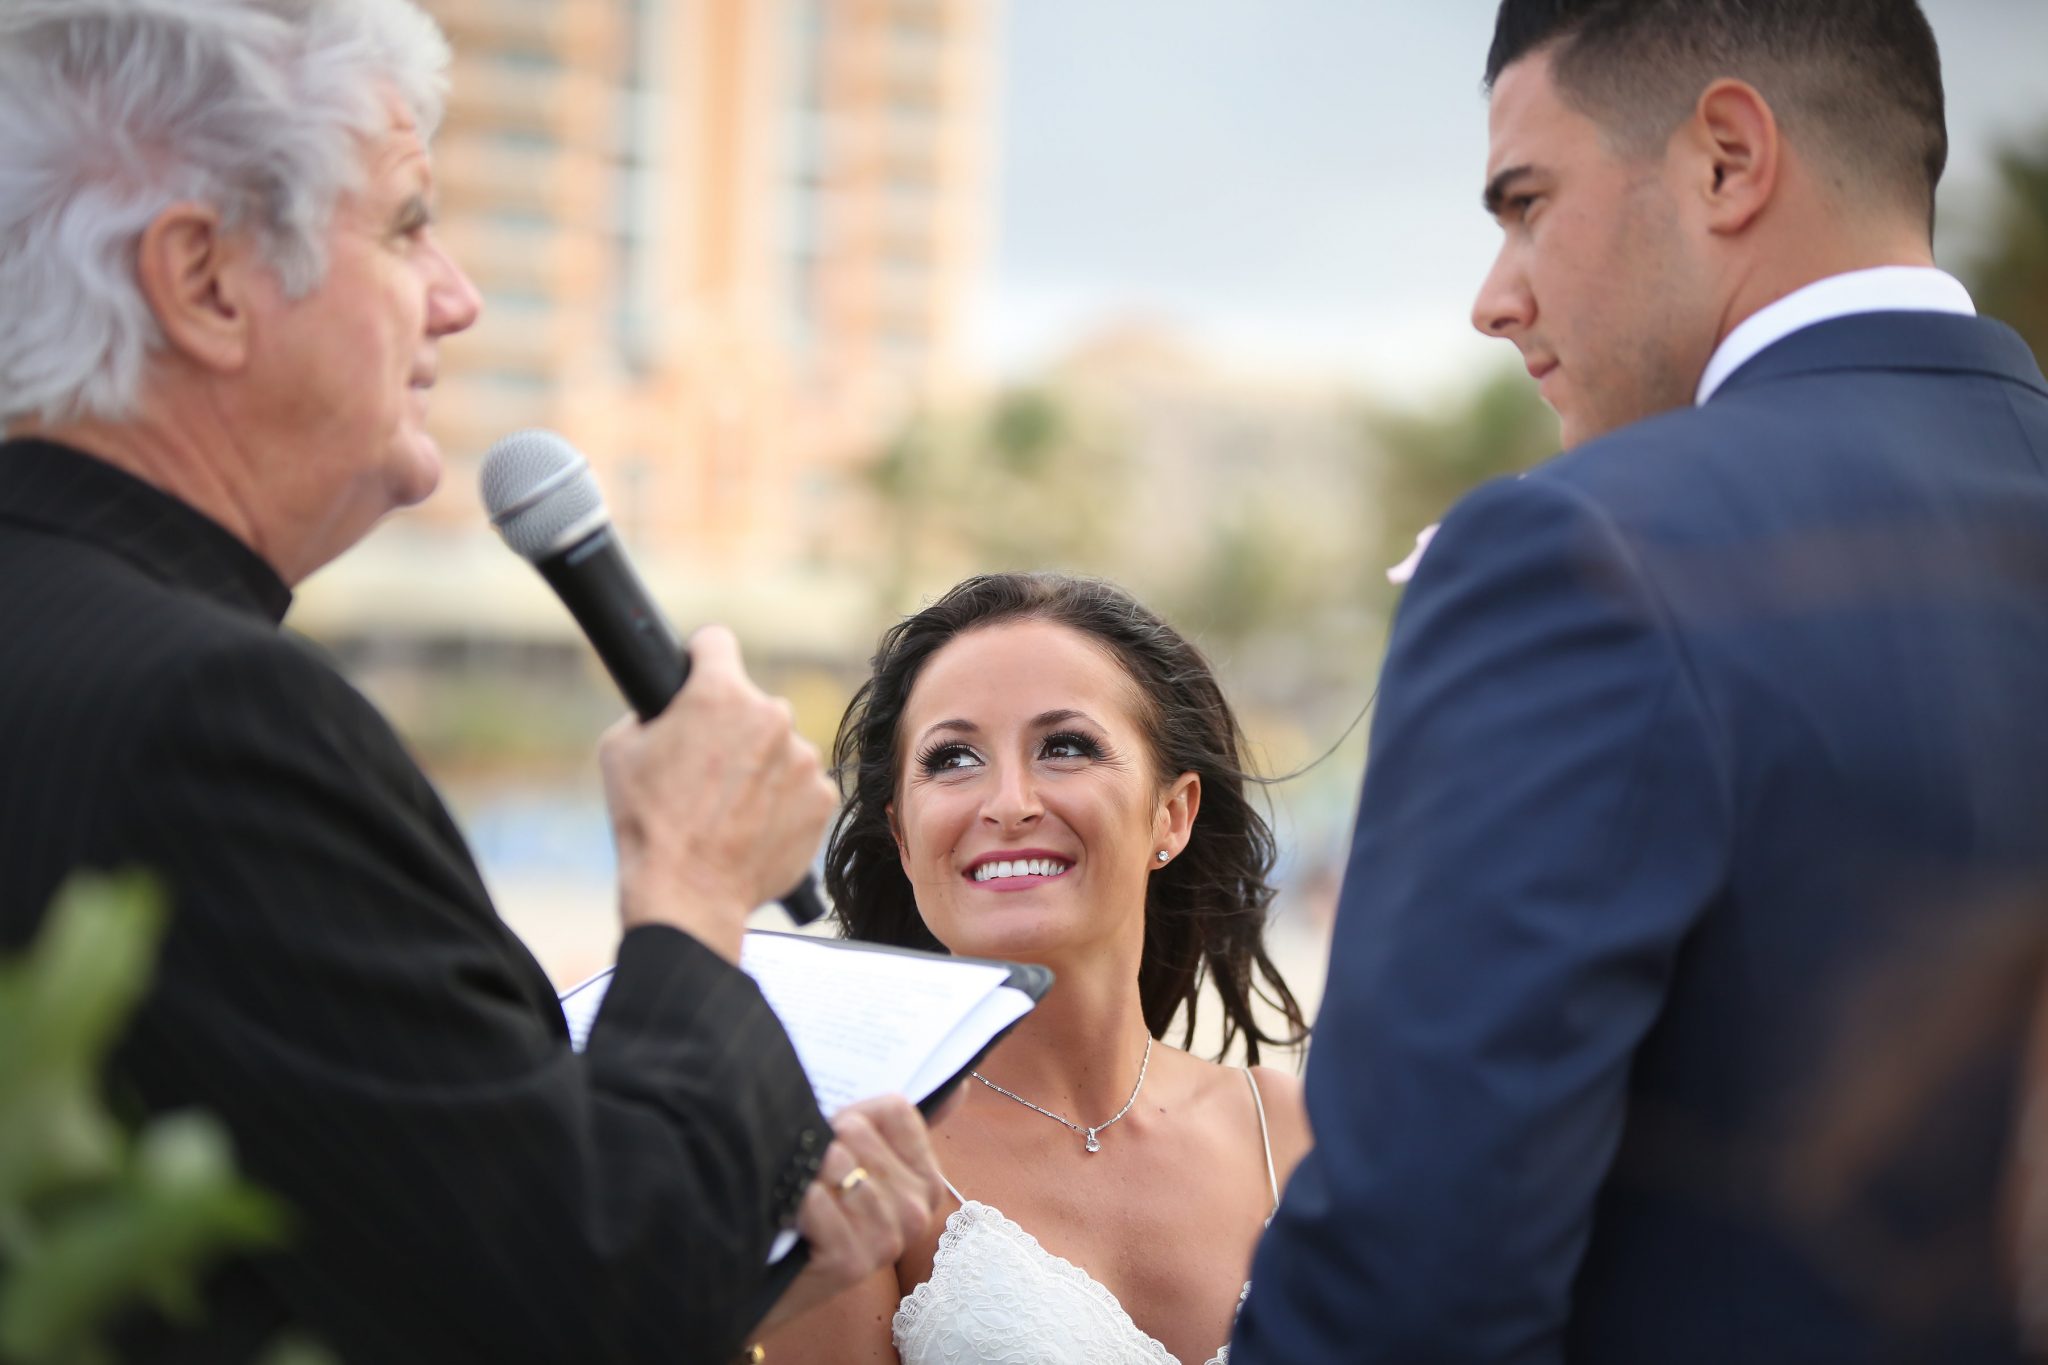 Wedding Vows · To Love and to Cherish